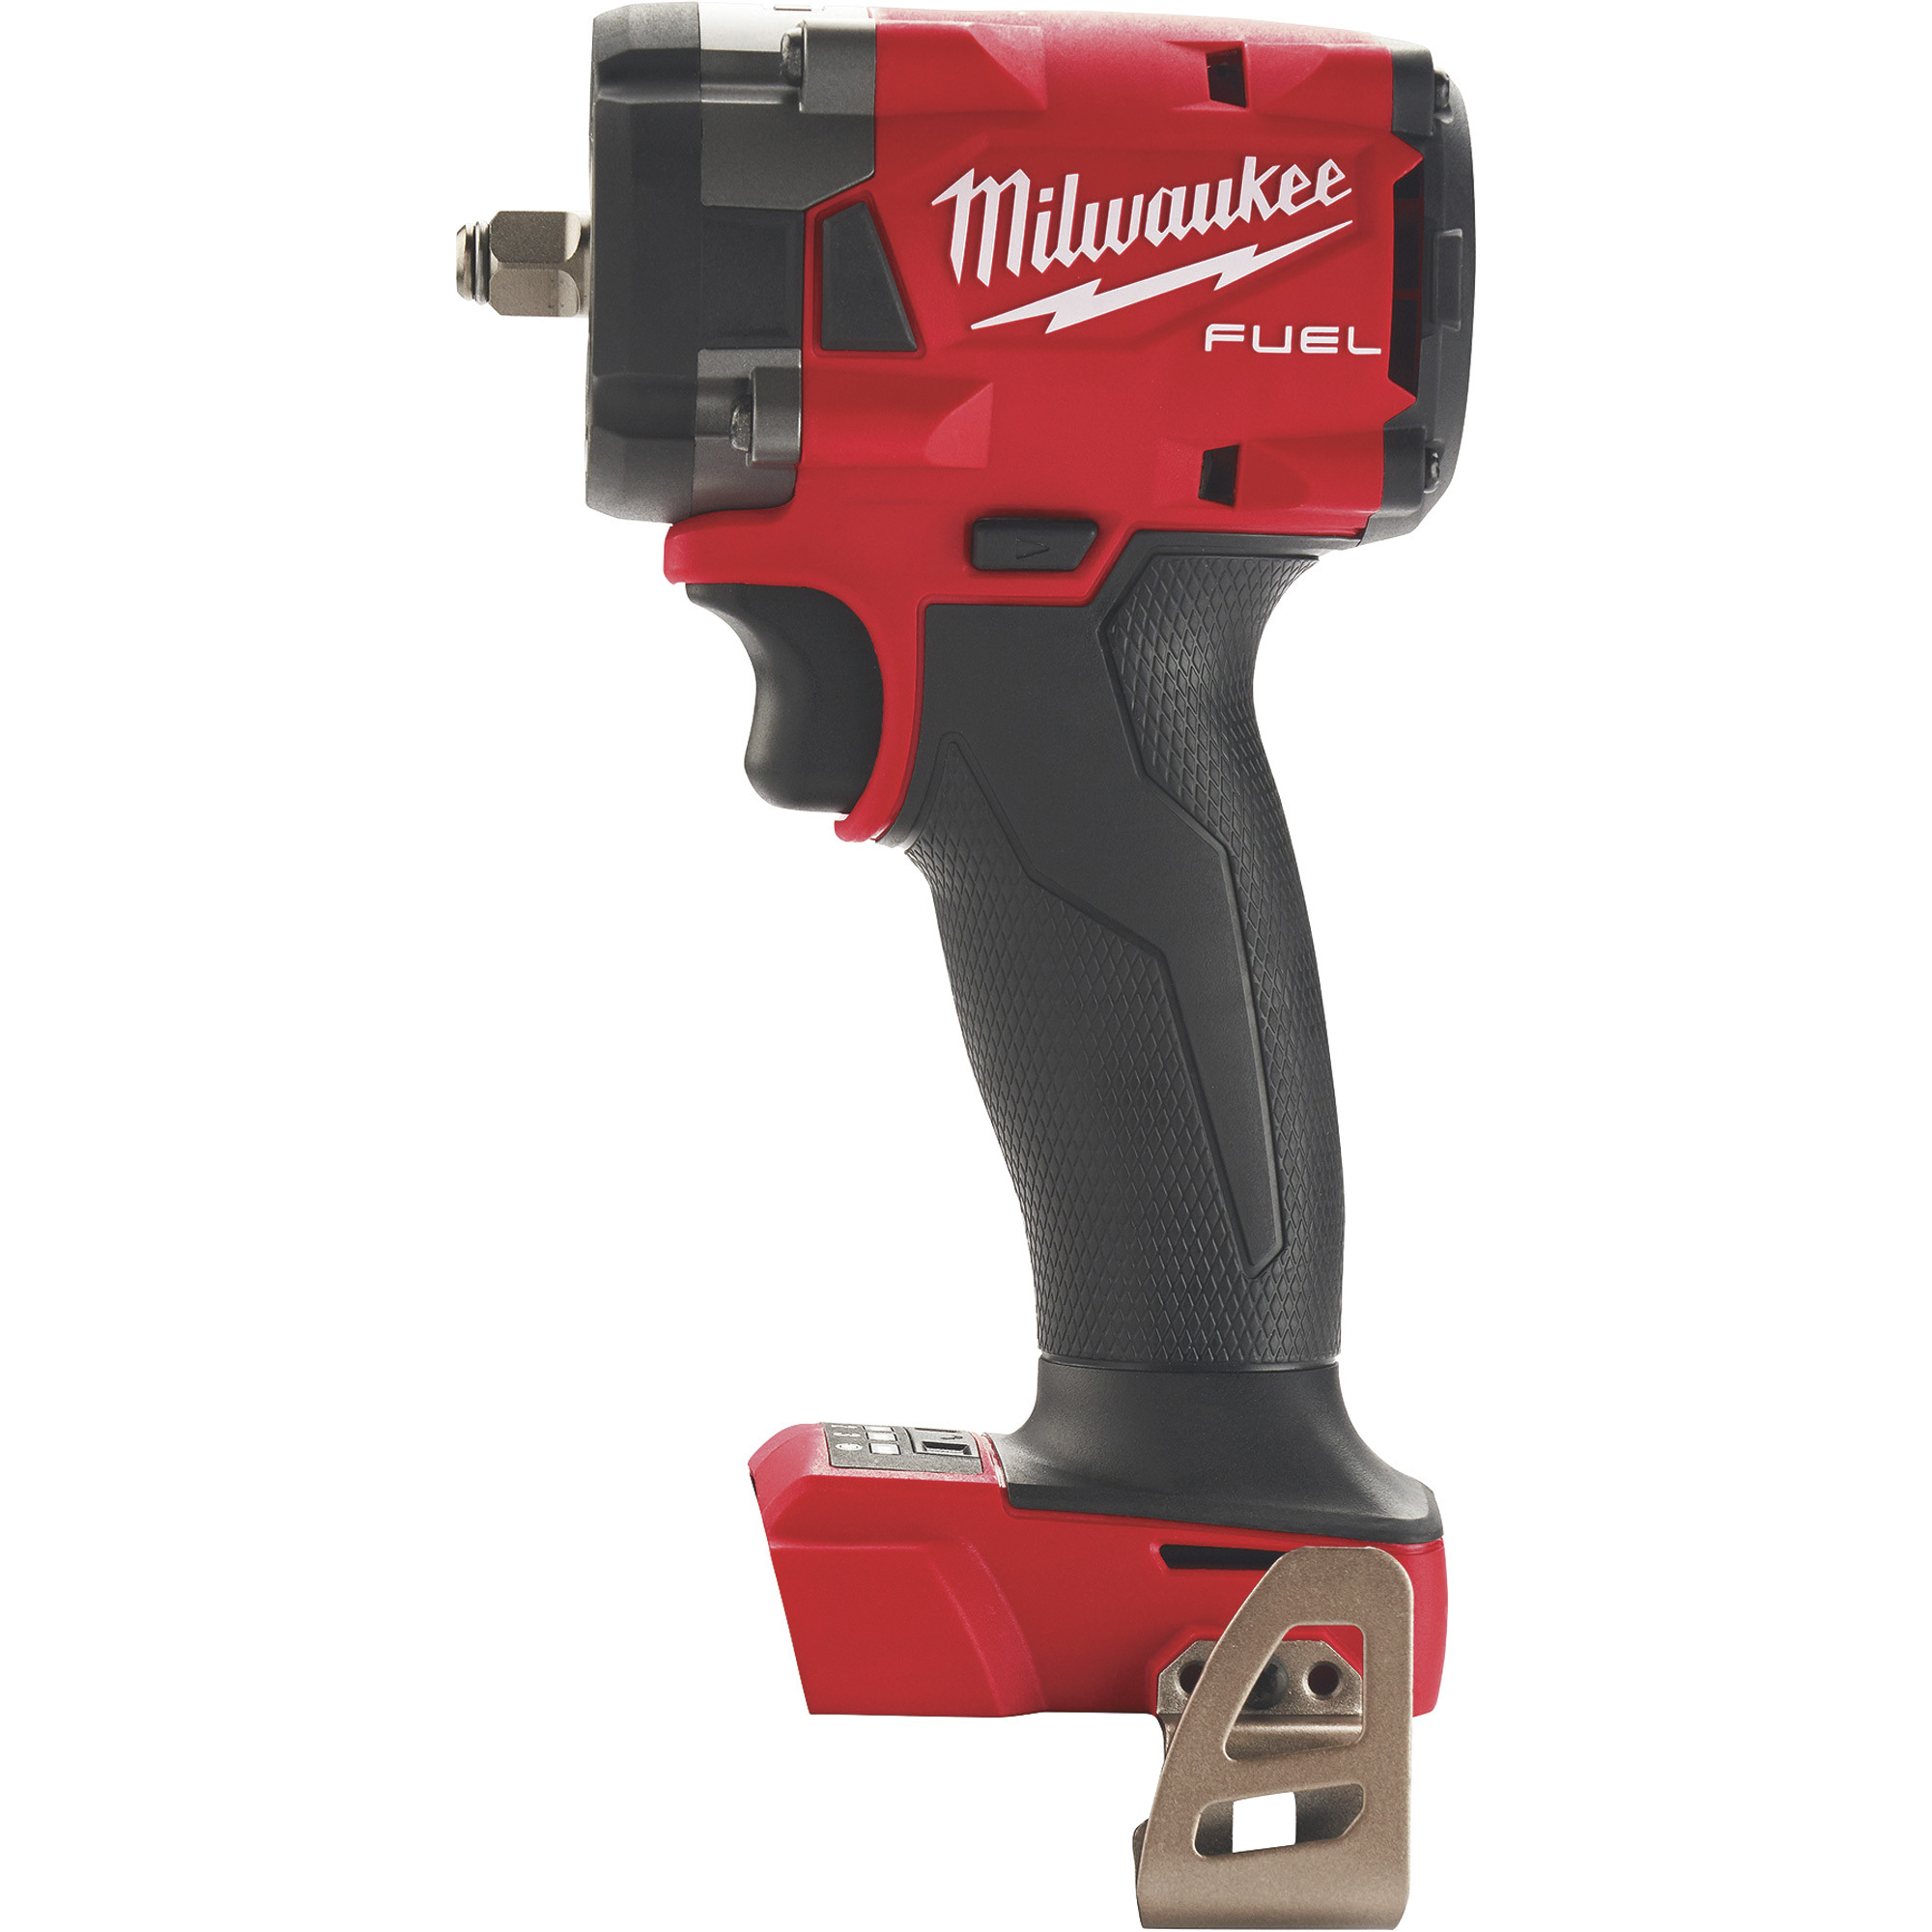 Milwaukee M18 FUEL Cordless Compact Impact Wrench with Friction Ring, Tool Only, 3/8Inch Drive, 250 Ft./Lbs. Torque, Model 2854-20